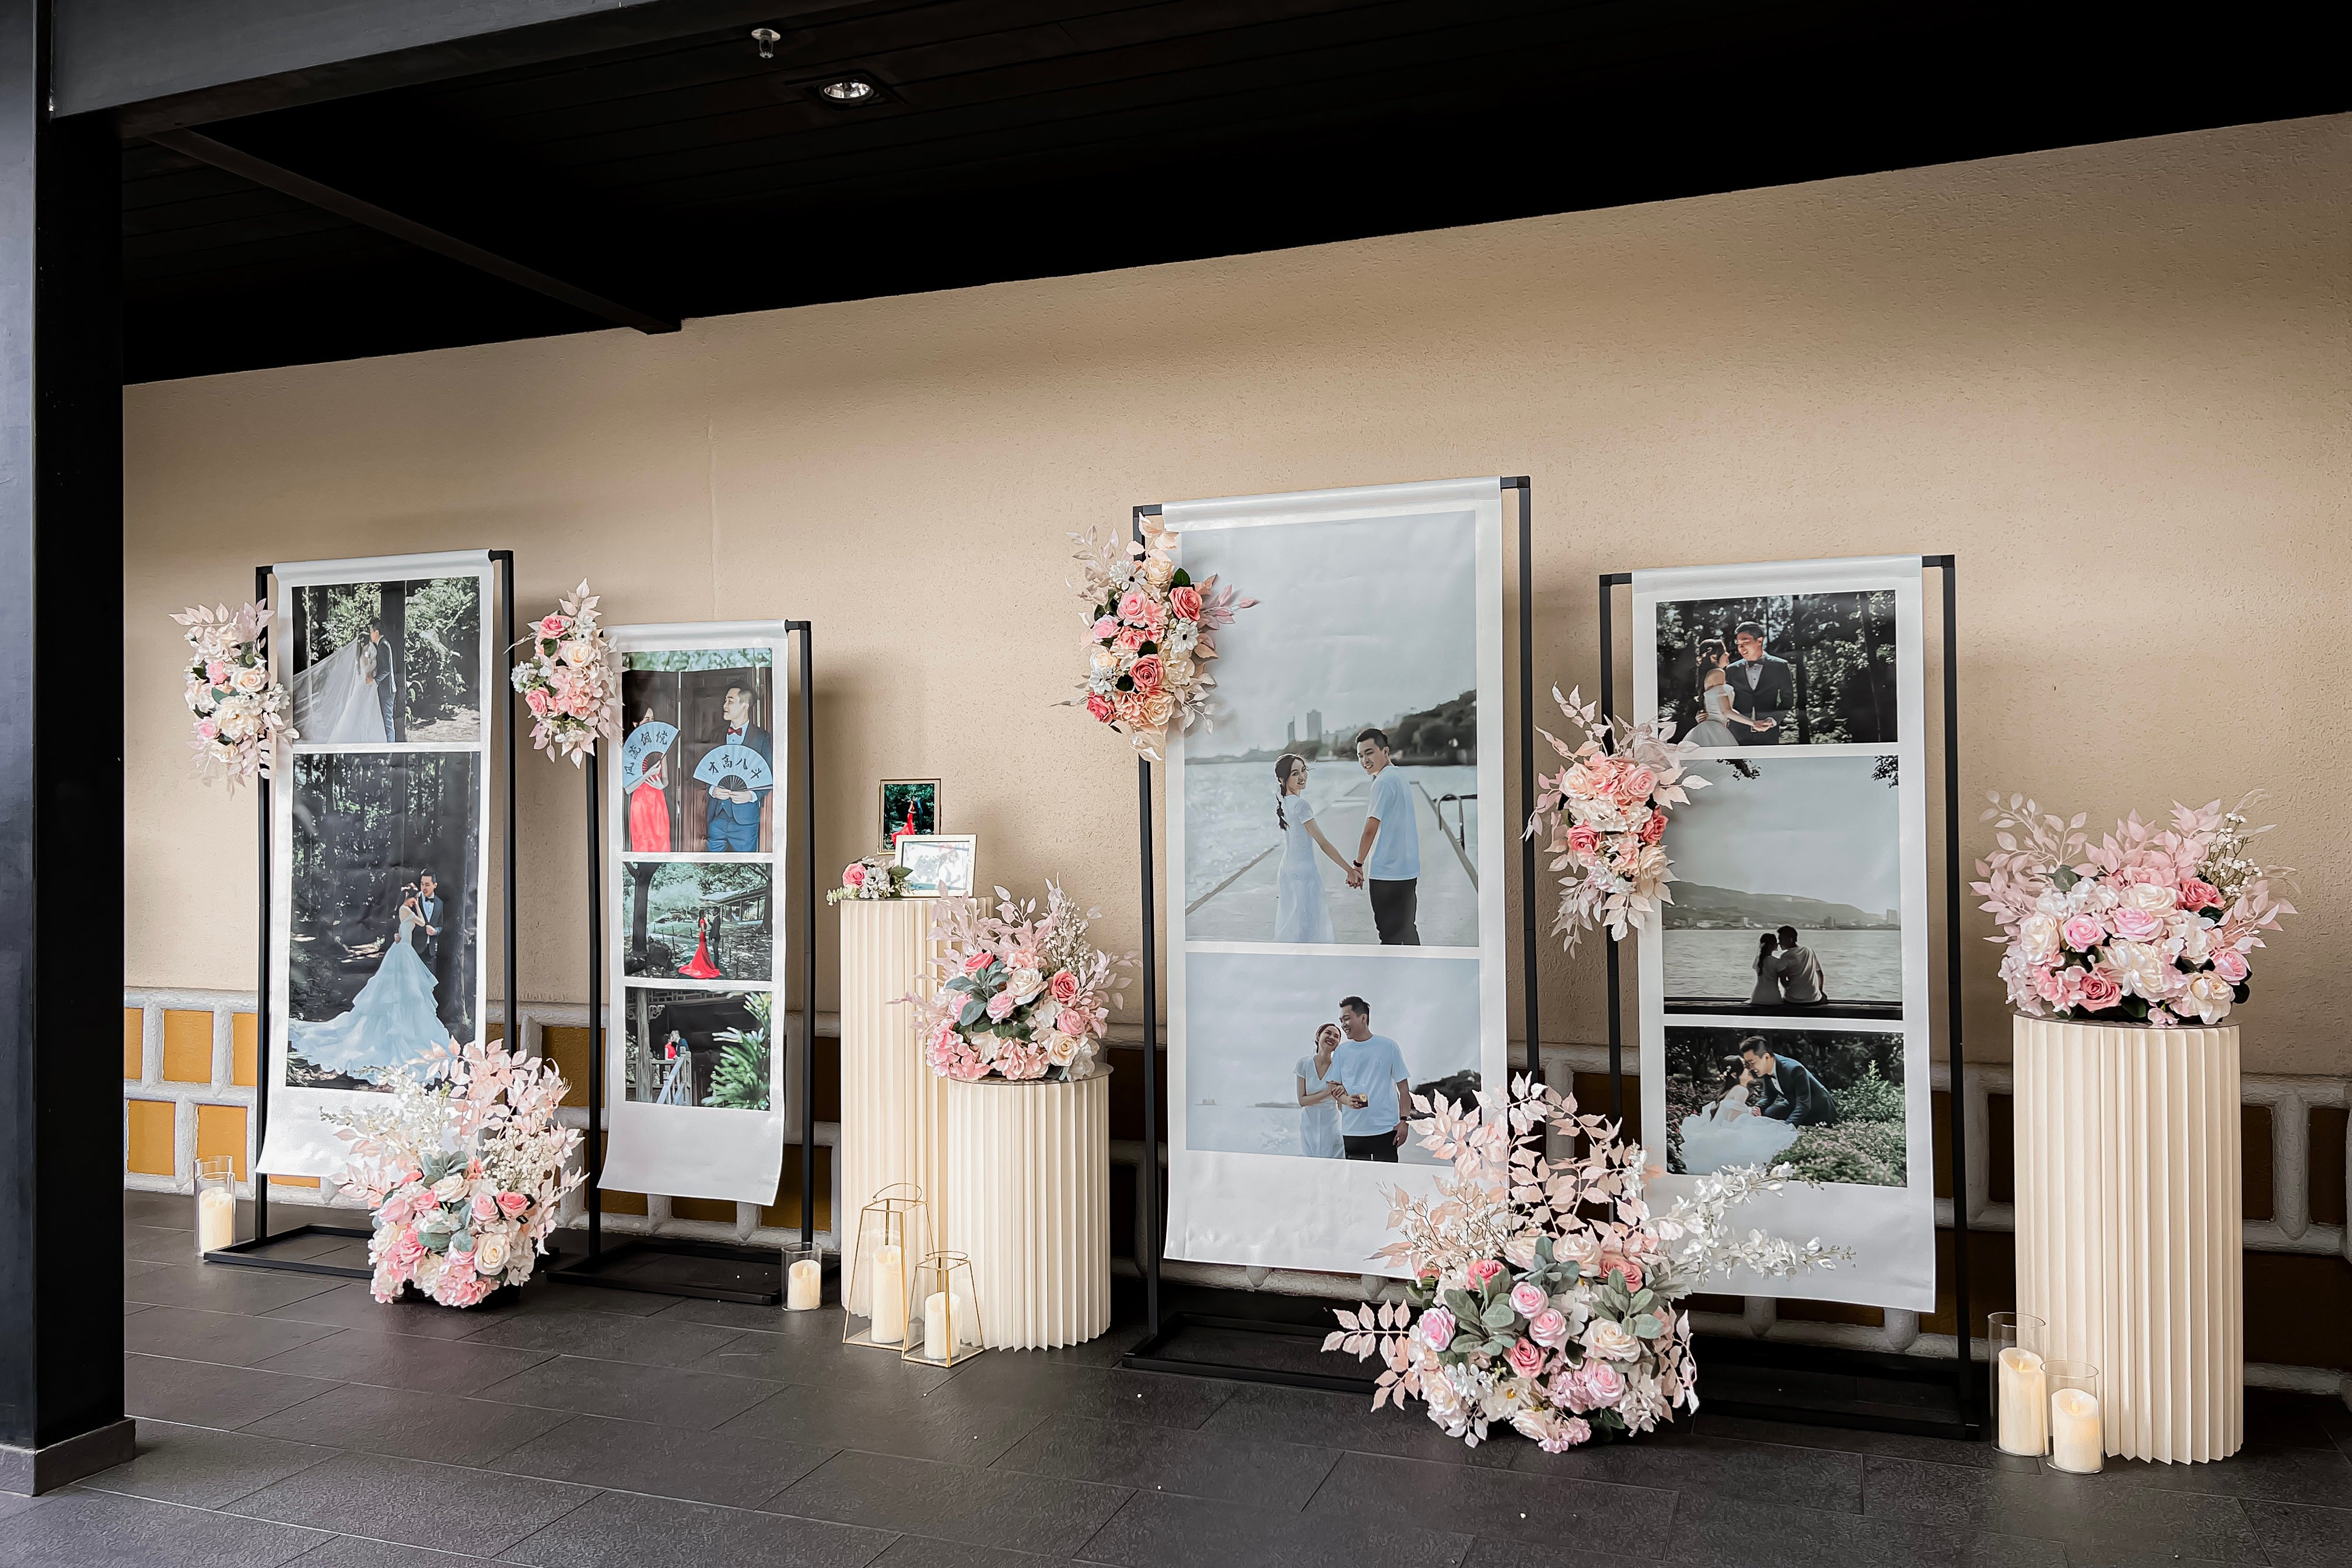 Wedding Reception Decor in Singapore - Multi-stands Photo Gallery with Pink & White Florals (Venue: Keyaki)